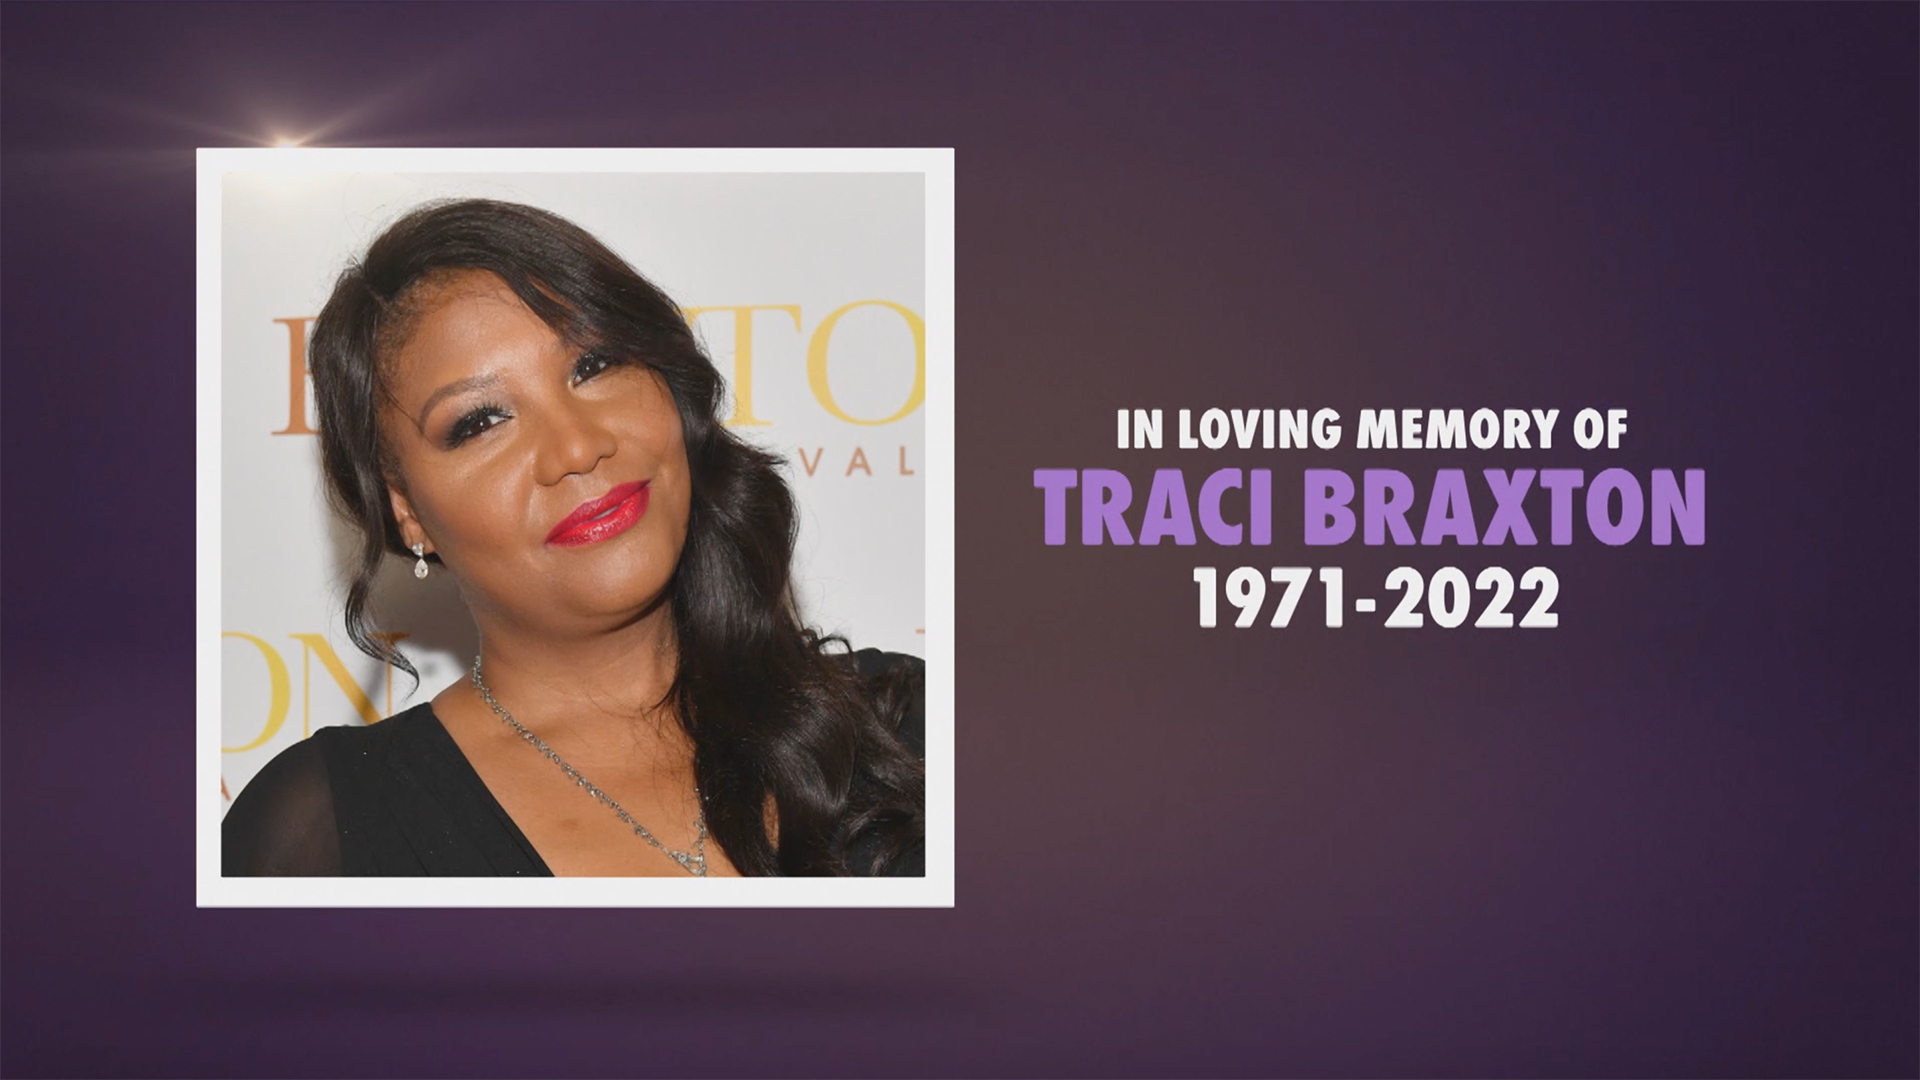 WE Pay Tribute to the #BFV Star